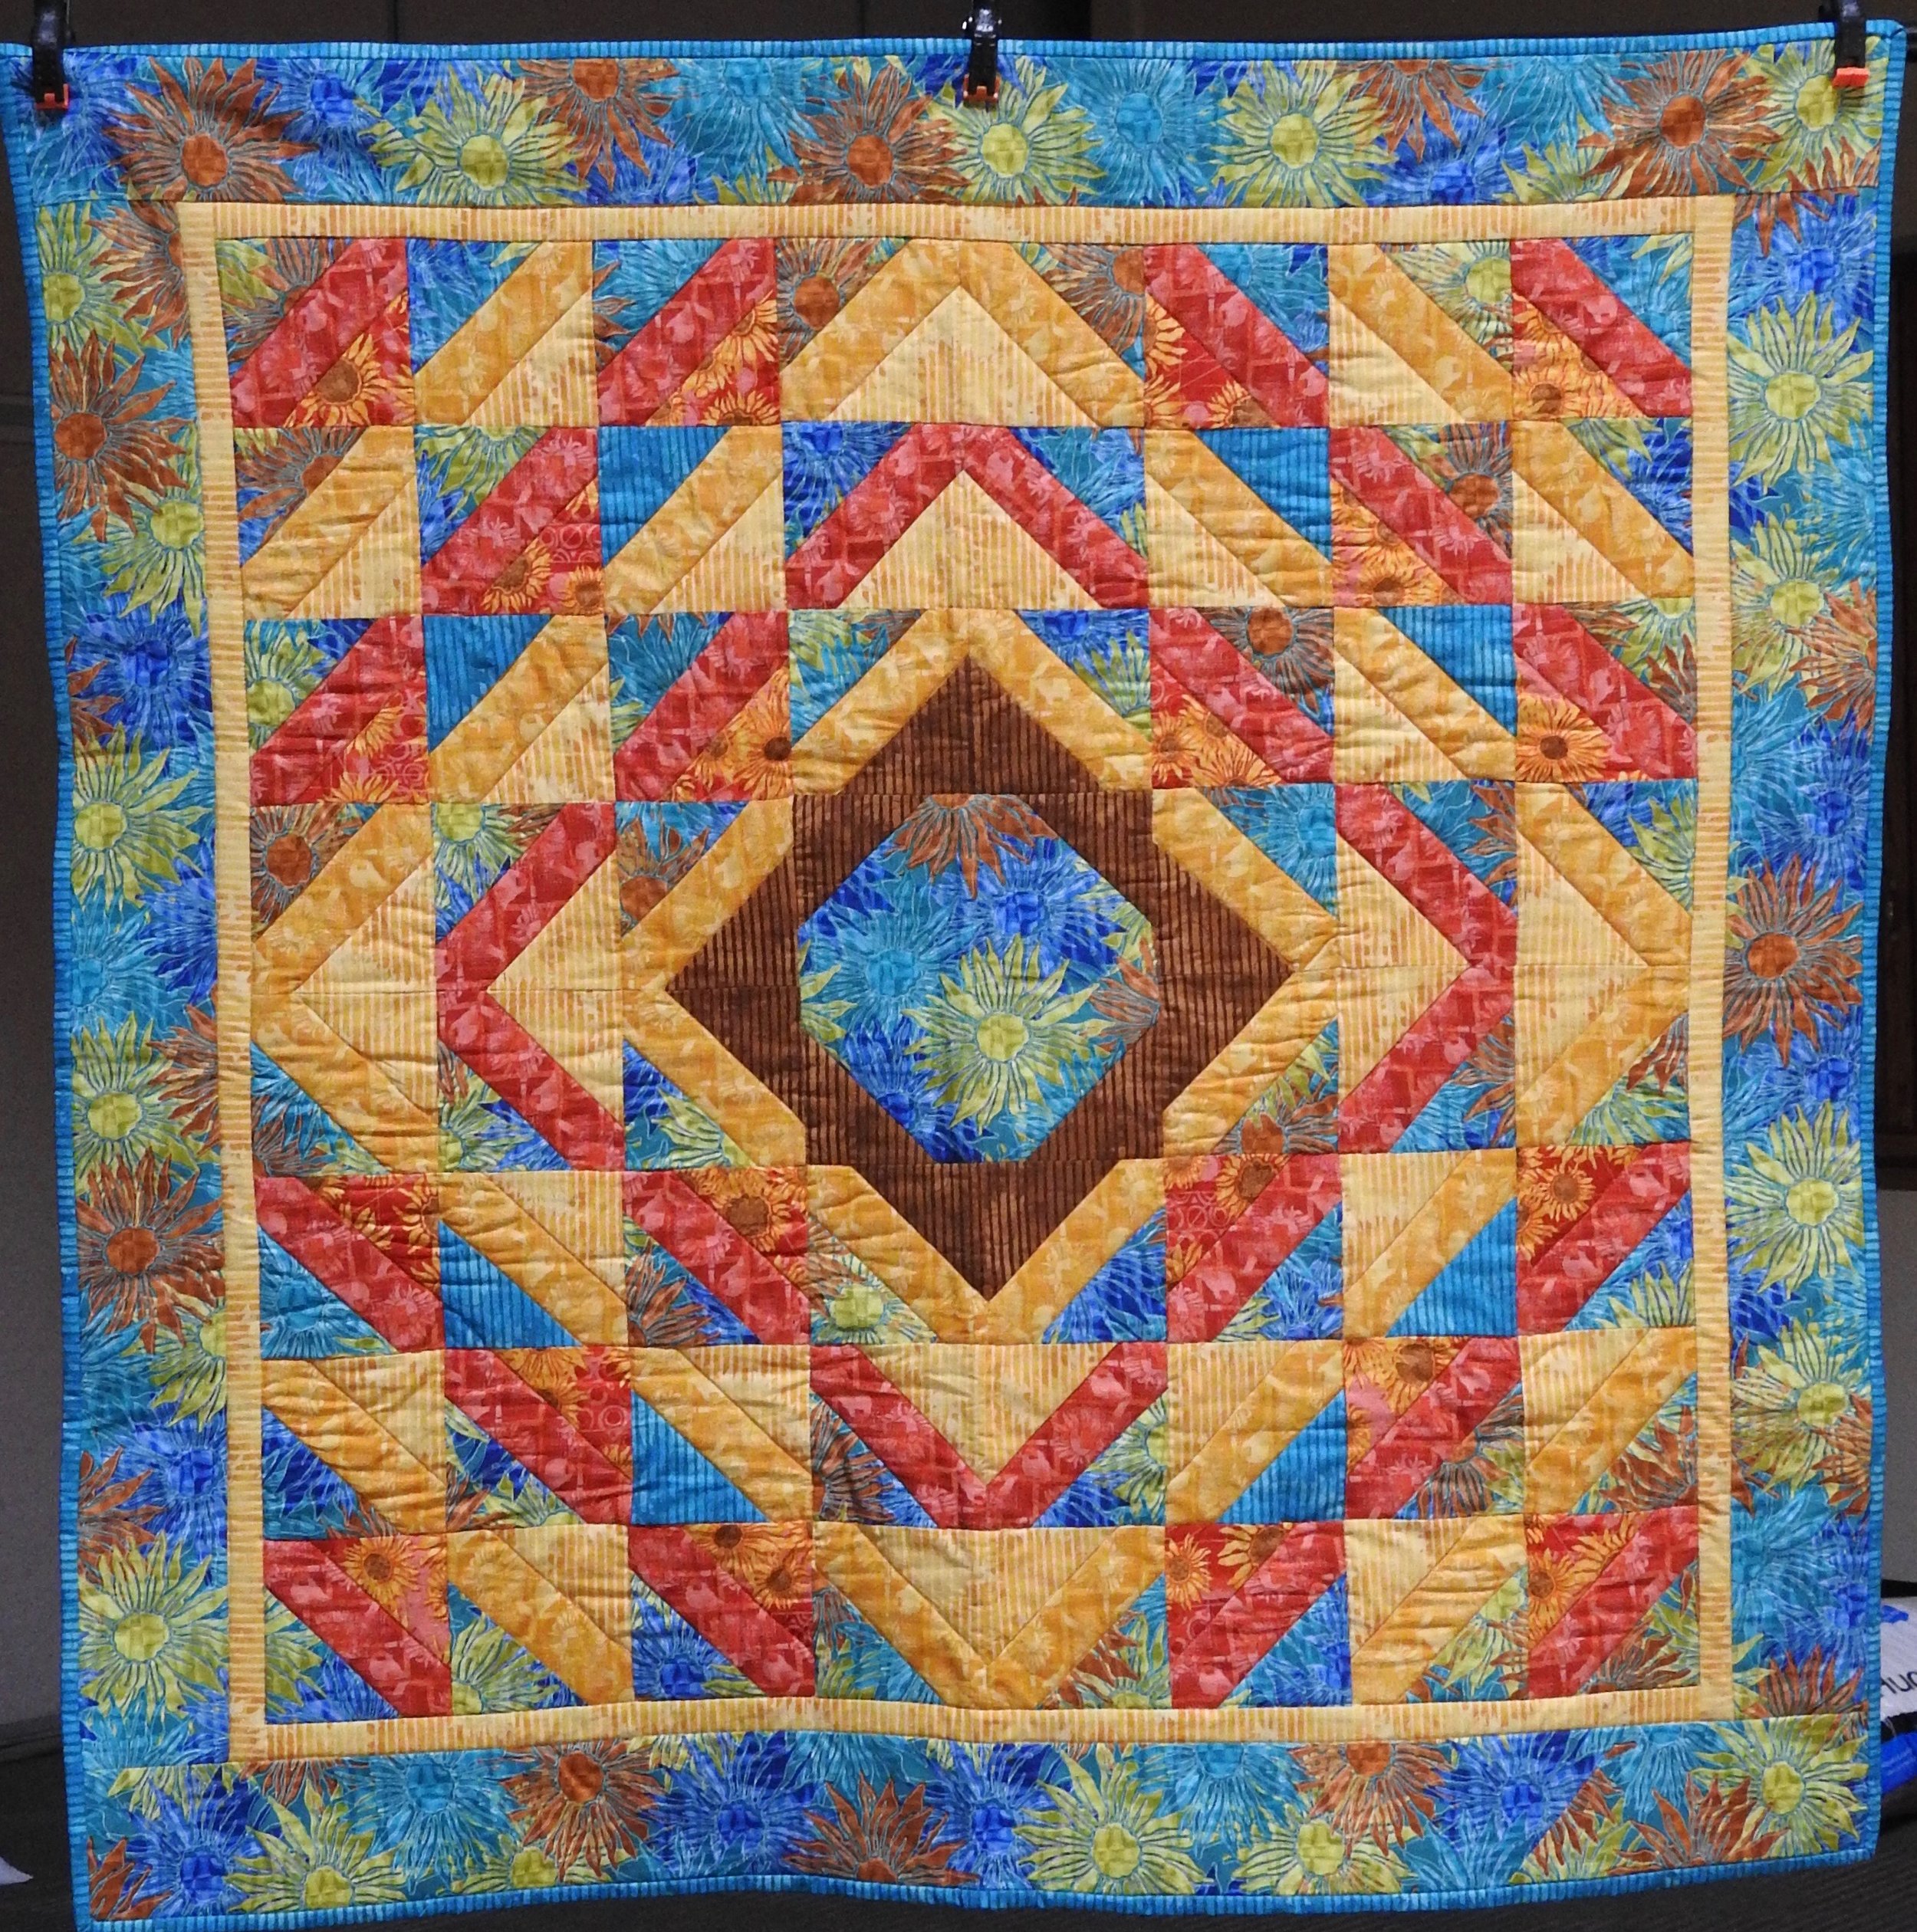 Southern Sunset, Pieced by Jean Mann Graber, Custom Machine Quilted, donated by The Cal Graber Family, 49 x 49”